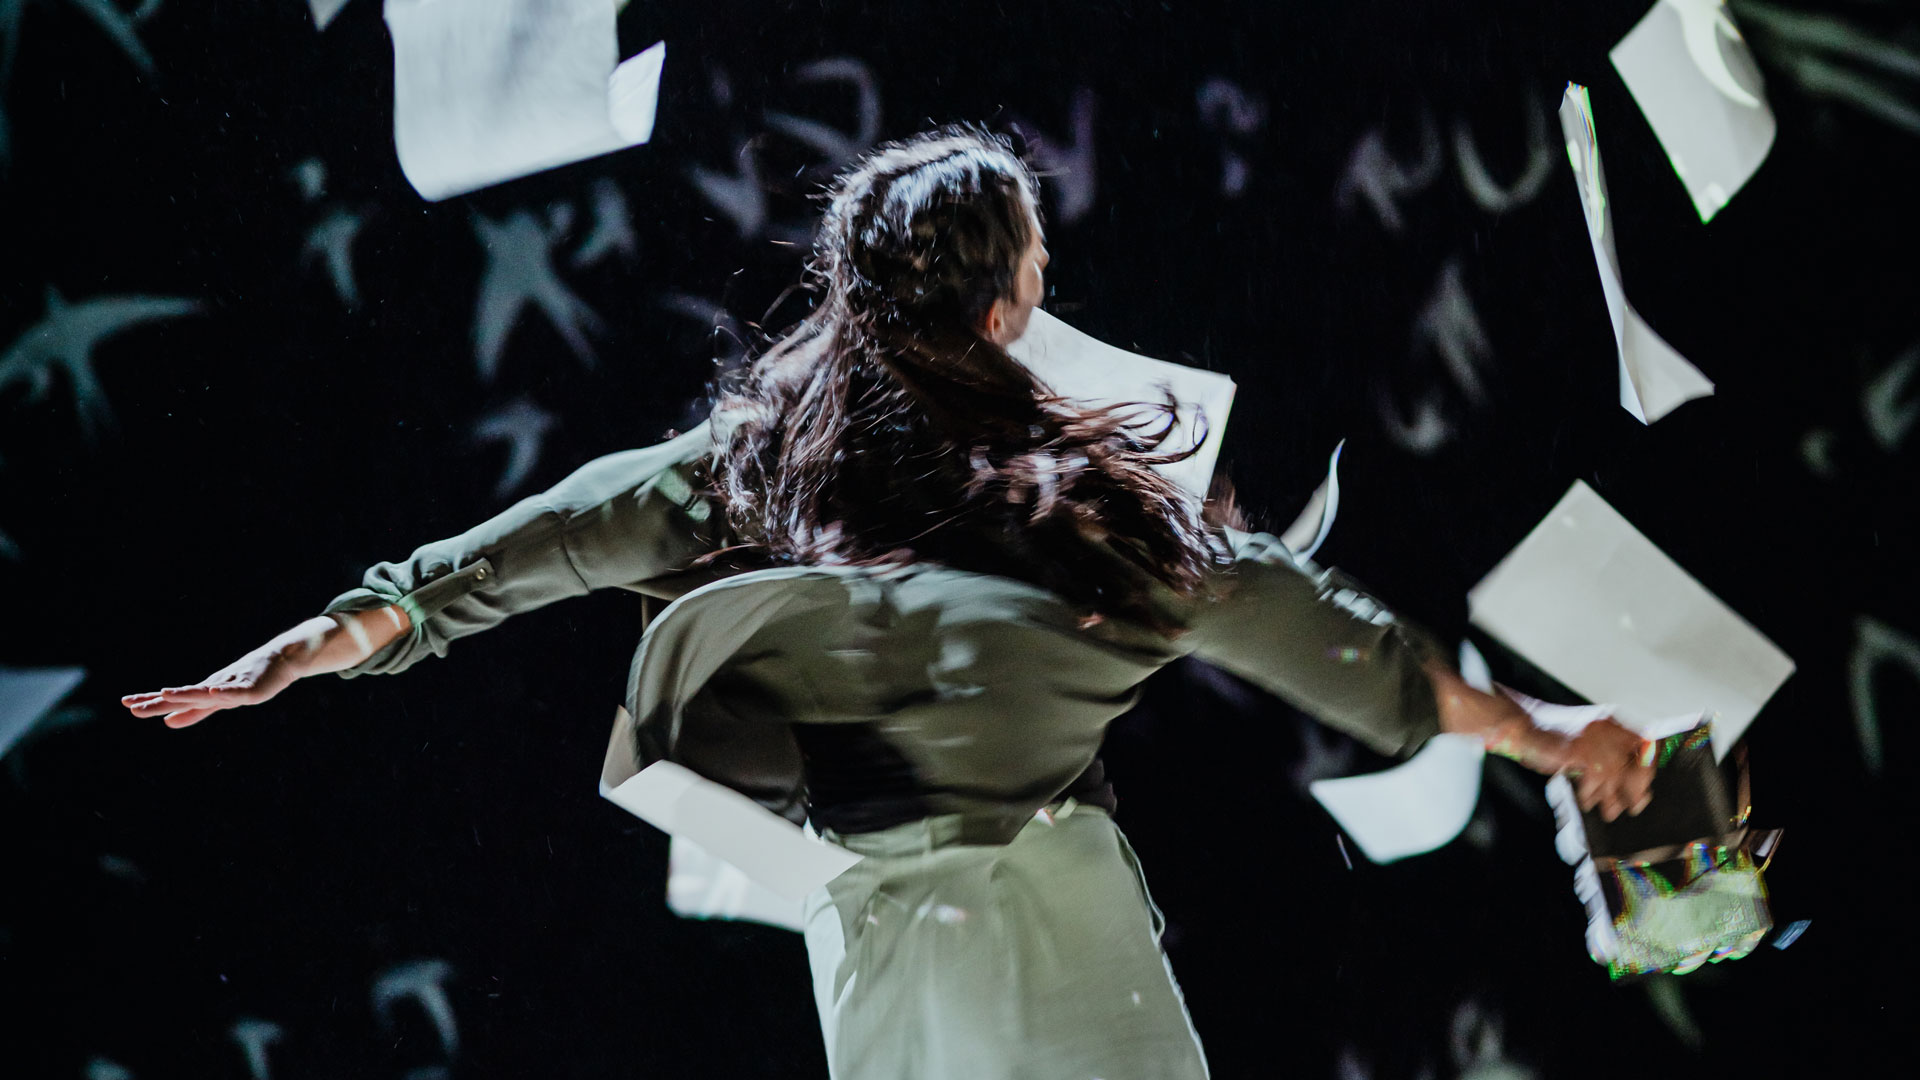 A performer with long hair wearing a long sleeve olive green top and beige pants faces away from the camera, holds a piece of paper and twirls as papers fall around them.